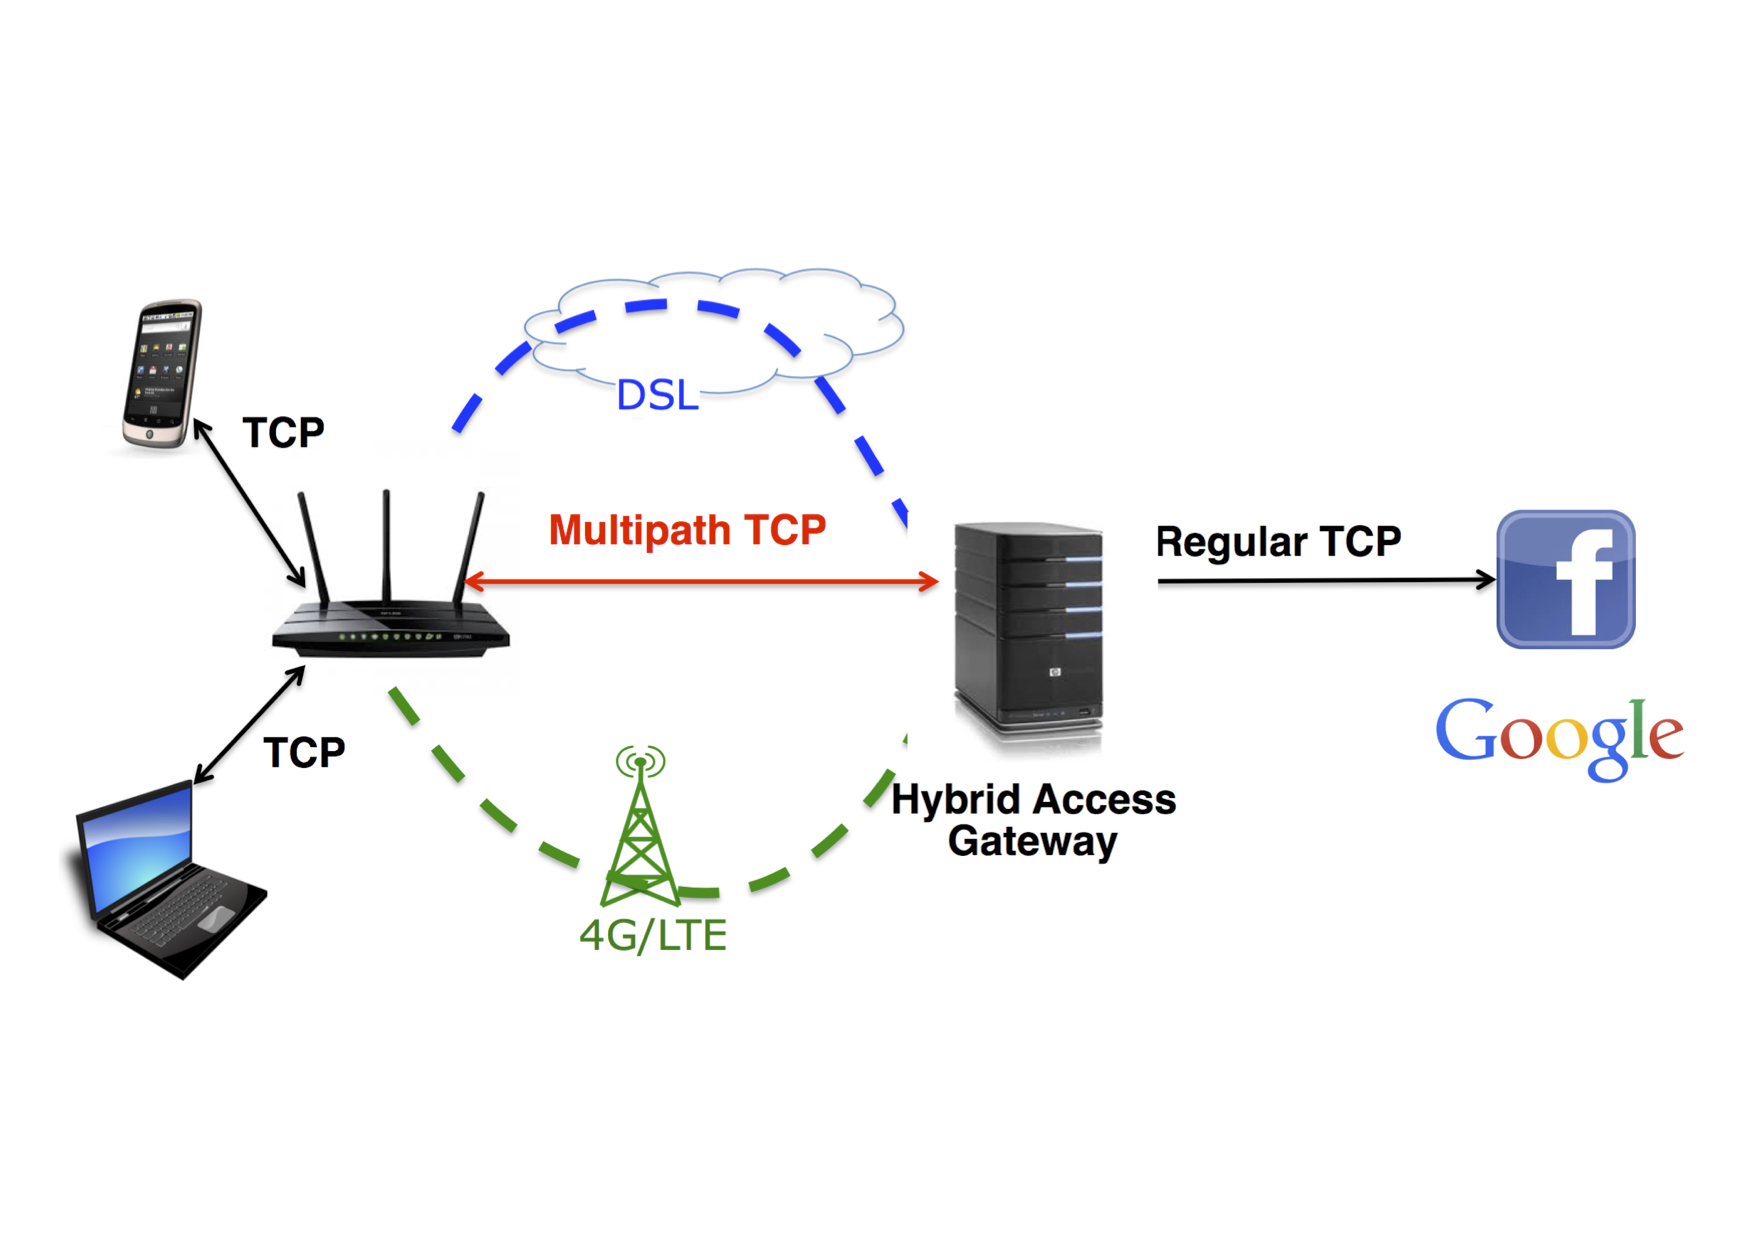 Hybrid access networks with Multipath TCP